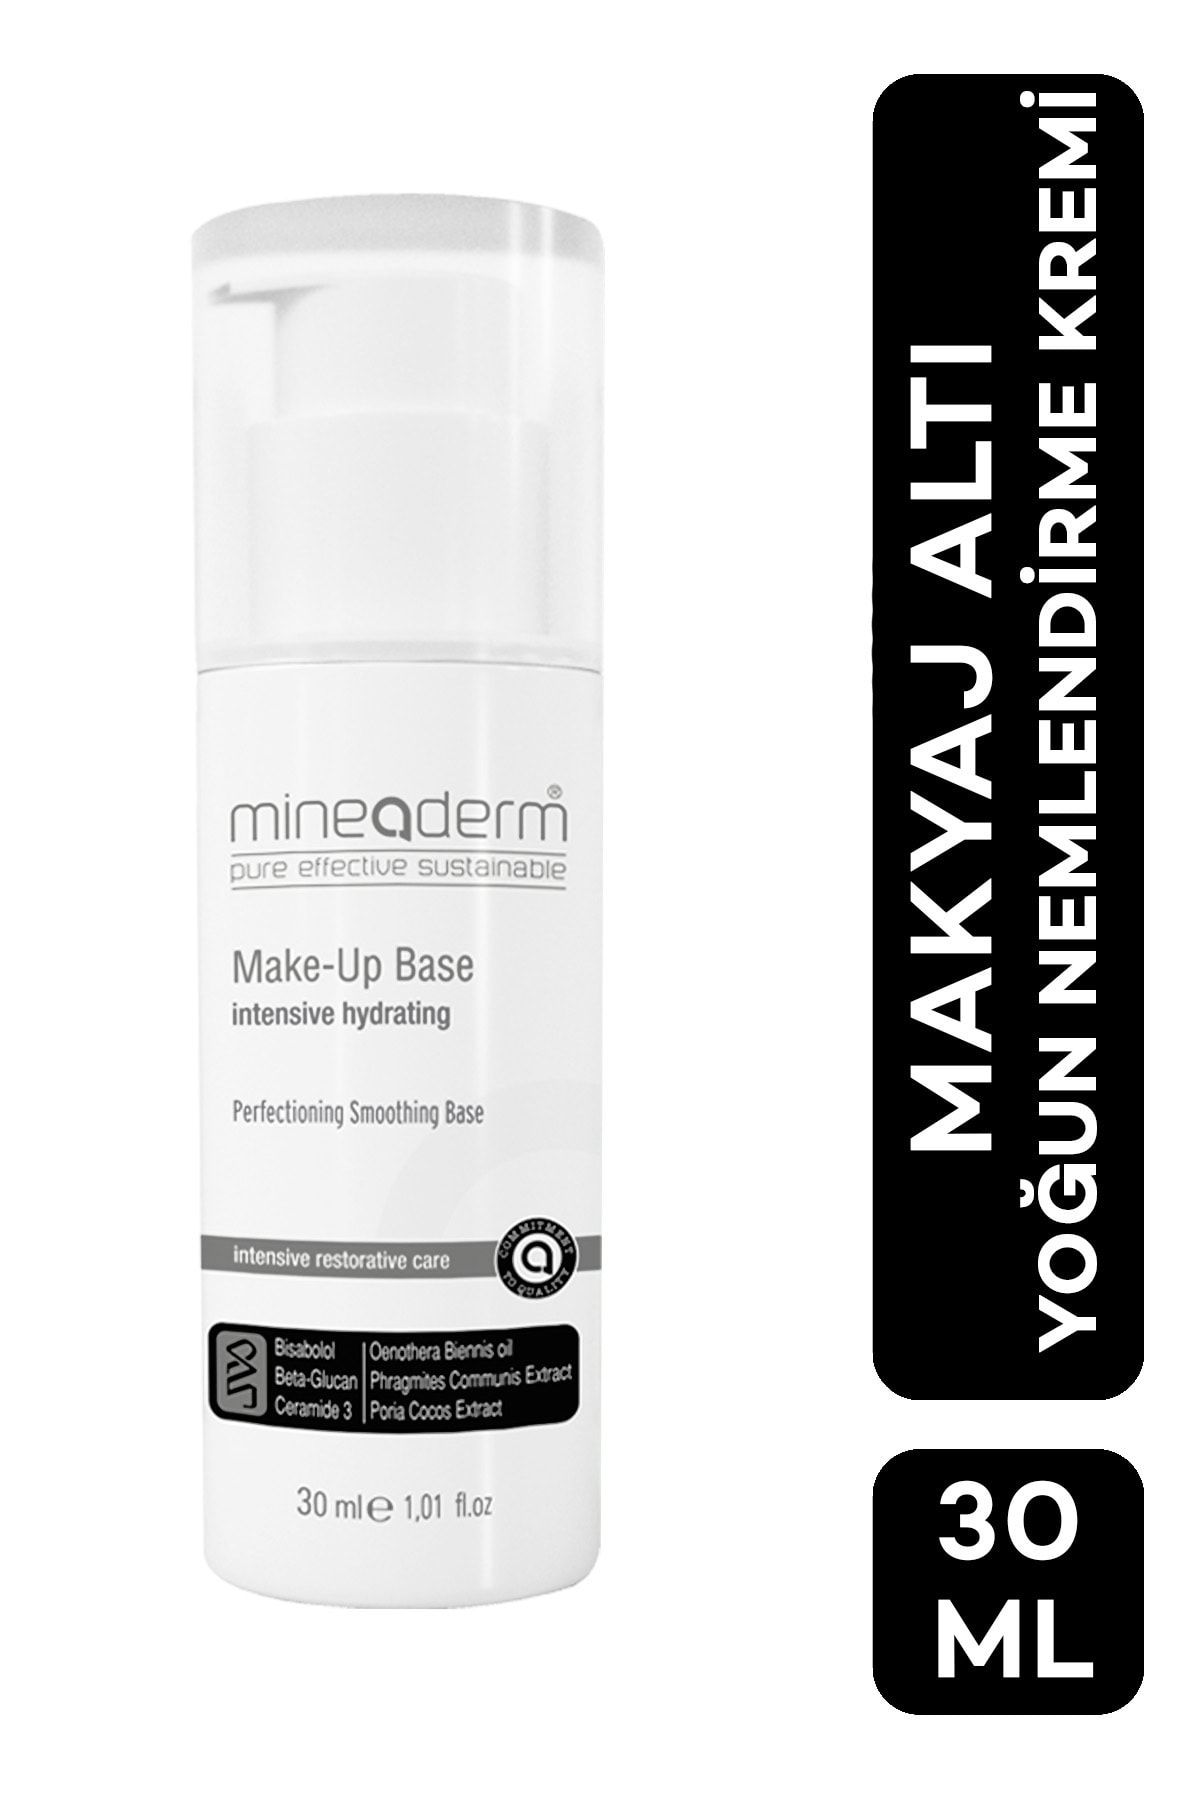 mineaderm Make-up Intensive Hydrating